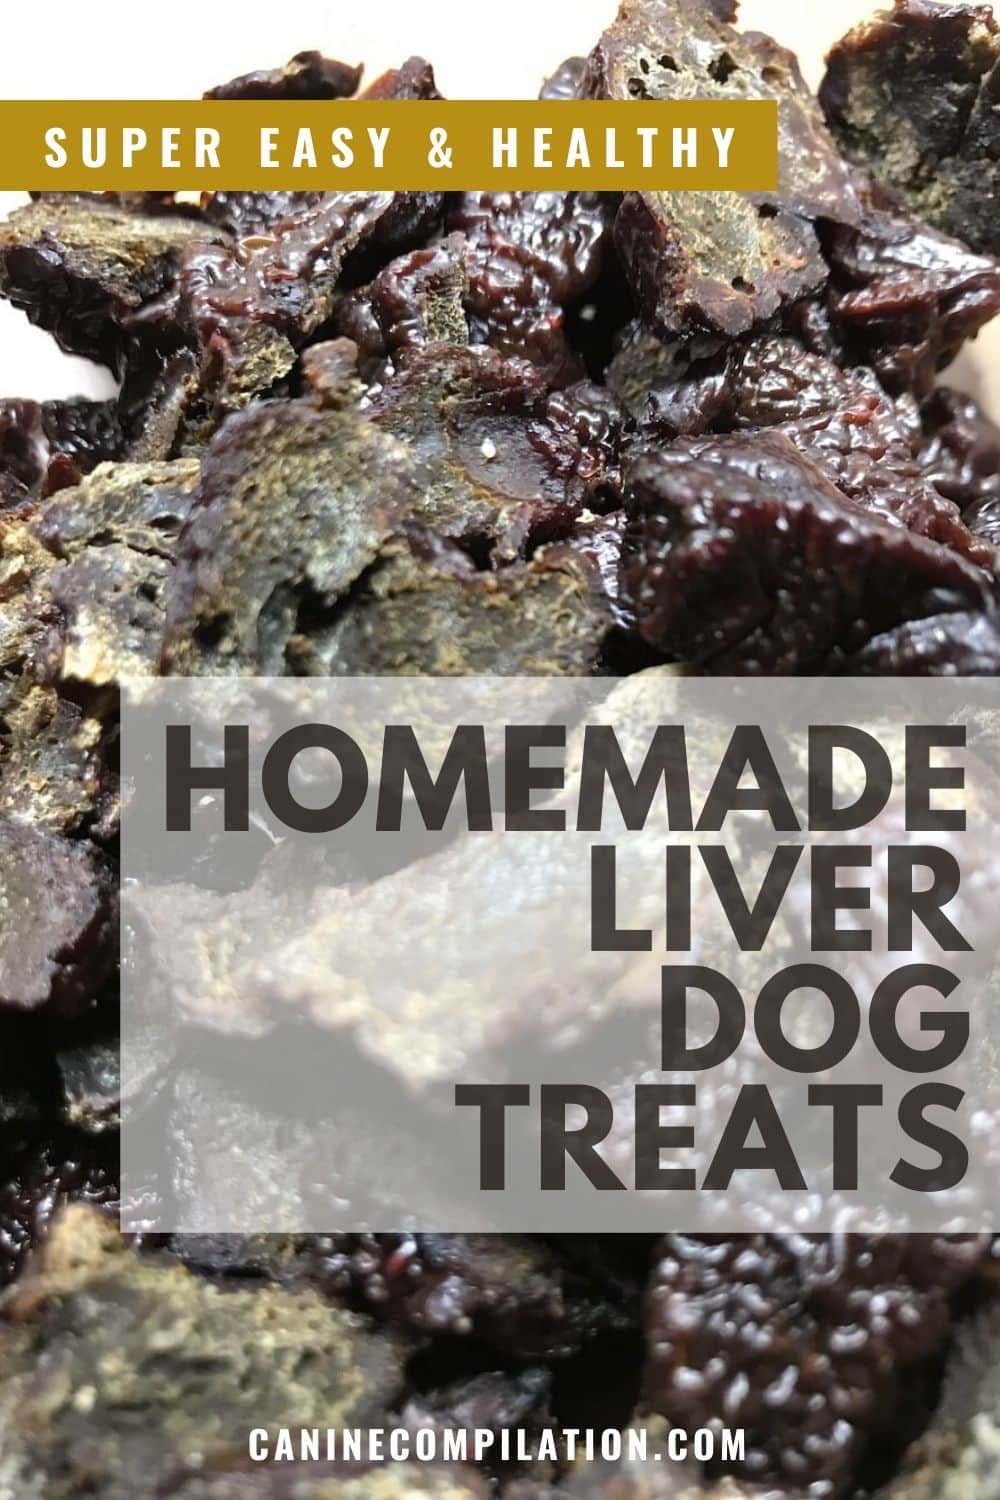 Homemade Dehydrated Liver Dog Treats - Canine Compilation